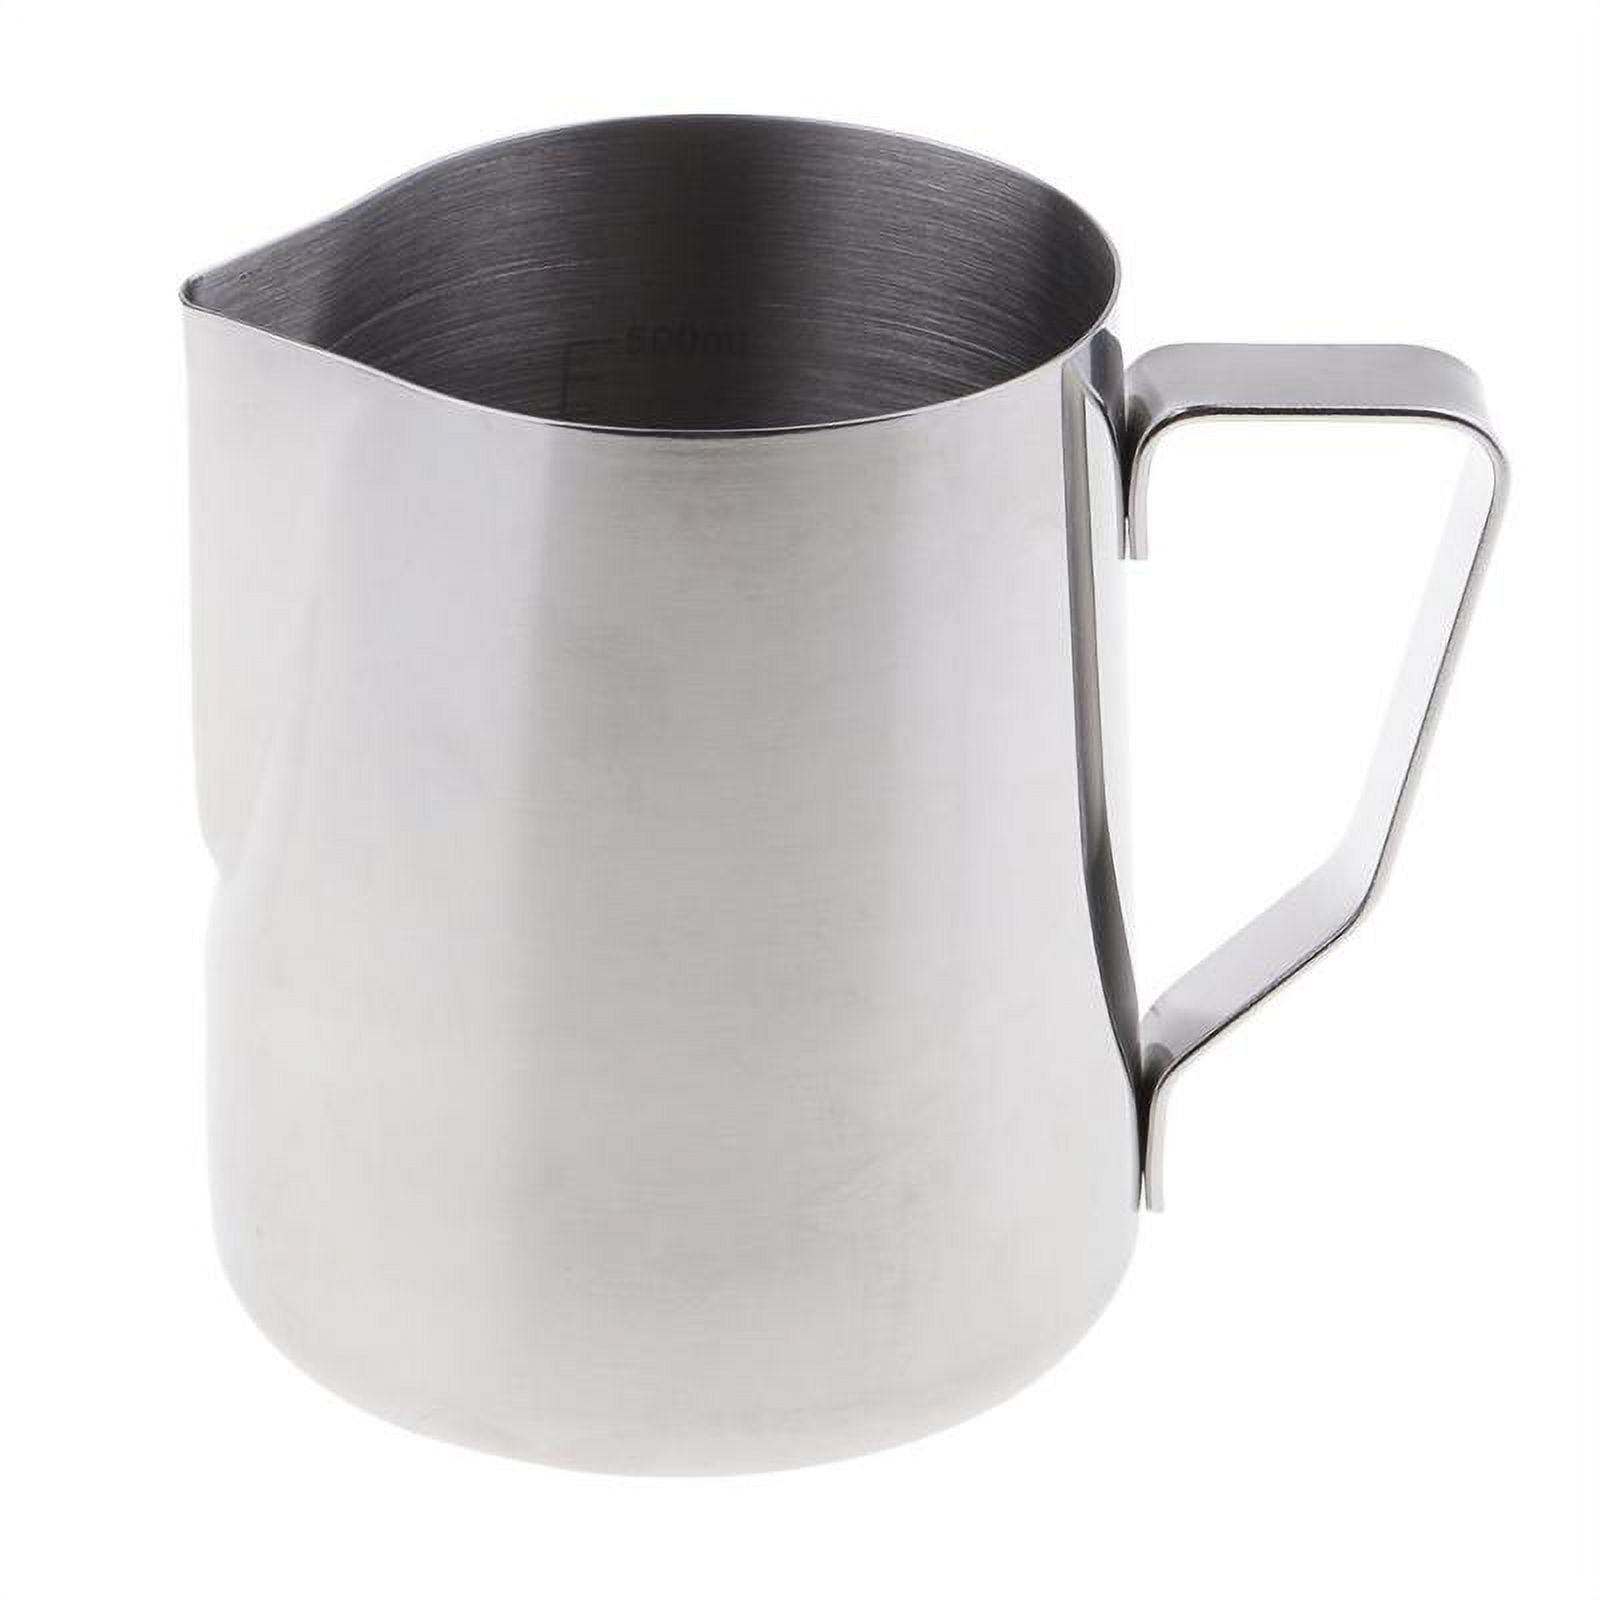 Stainless Steel Pouring Pot Candle Making Wax Melting Jug Pitcher